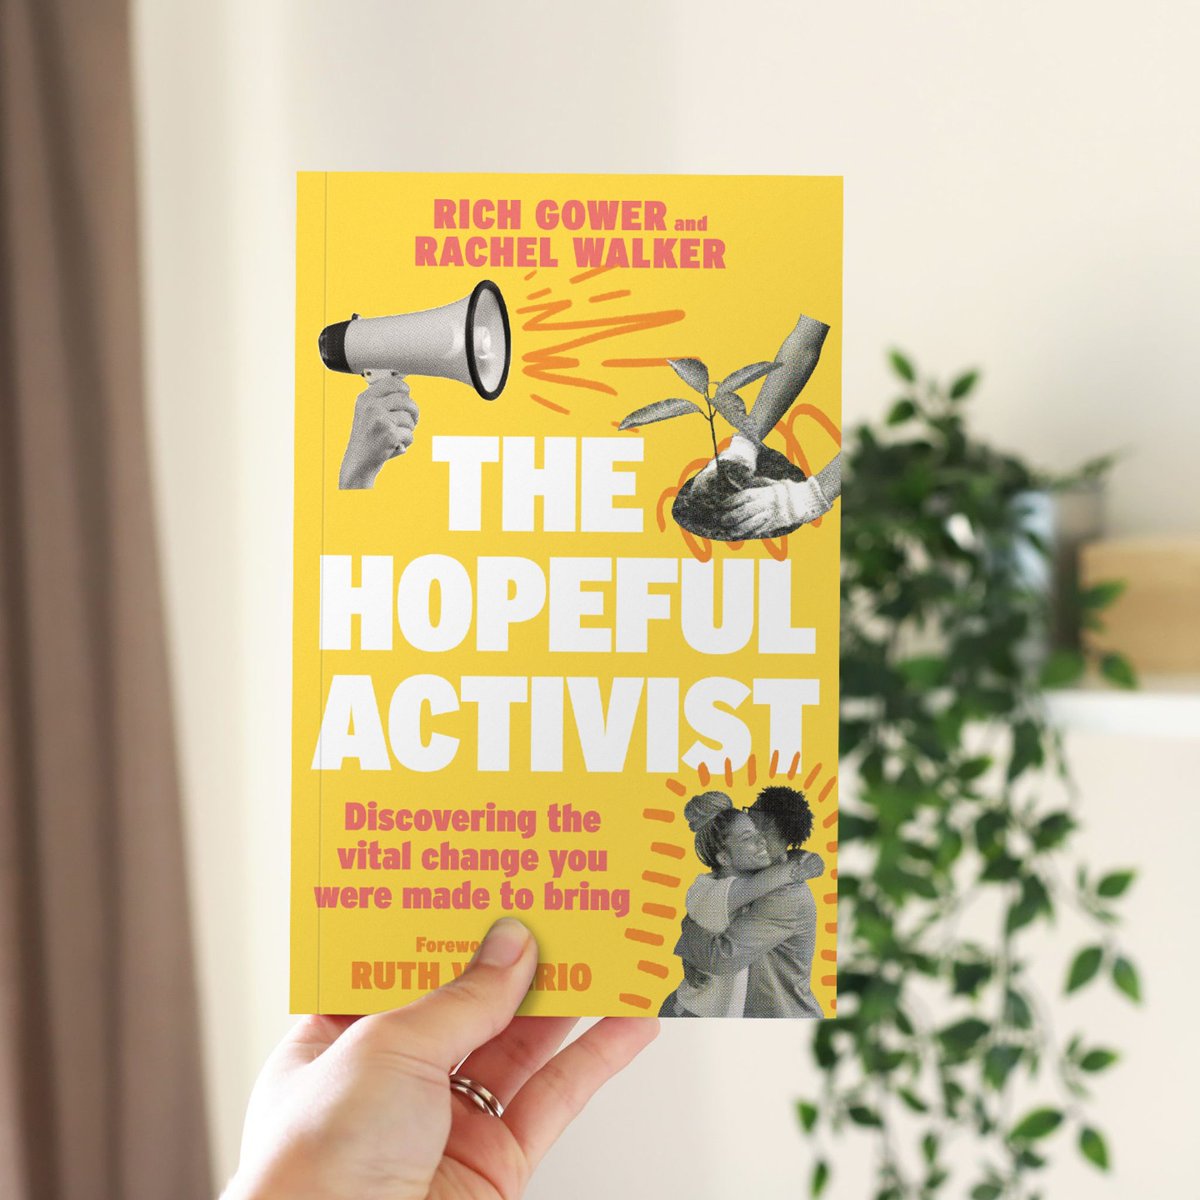 ‘The Hopeful Activist’ is about discovering the vital change that YOU were made to bring🌱📢 Whether you are new to activism or already on the road, this book will (re)kindle your hope and illuminate the way ahead. The book is available to pre-order ➡️ spckpublishing.co.uk/the-ordinary-a…